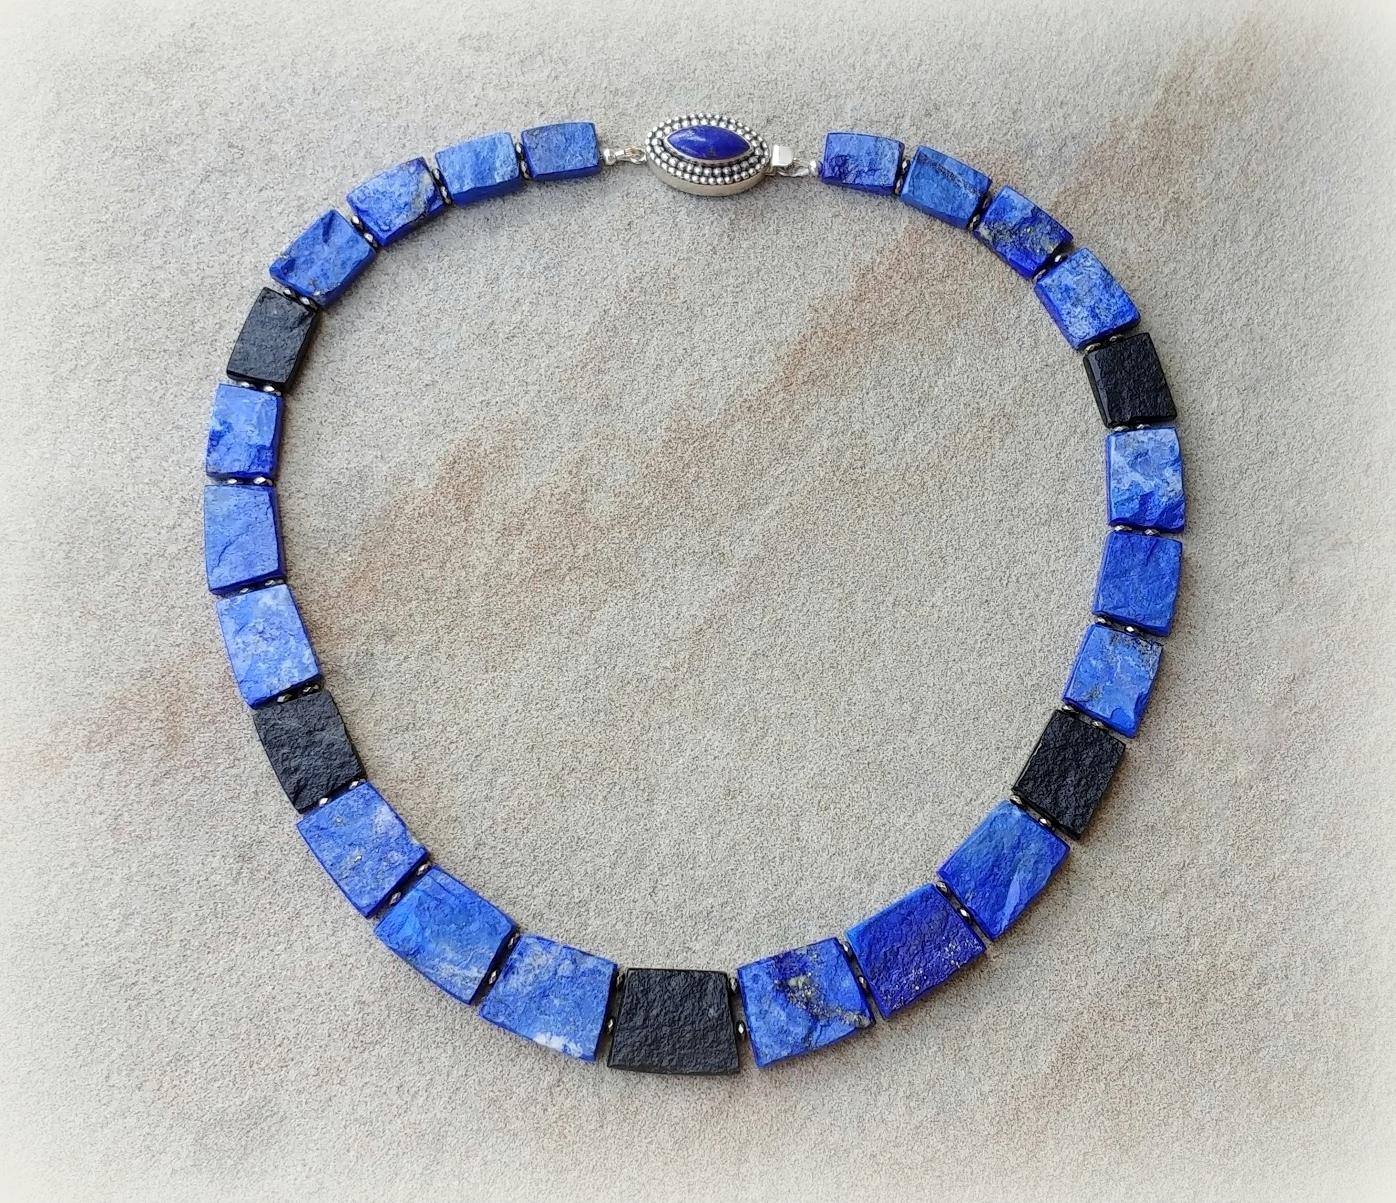 Stunning one-of-a-kind necklace made with high-quality deep blue Afghan lapis lazuli nuggets with inclusions of gold pyrite and high-quality Brazilian black tourmaline (Schorl). The size of the nuggets varies from 25mm x 20mm to 15mm x 12mm.